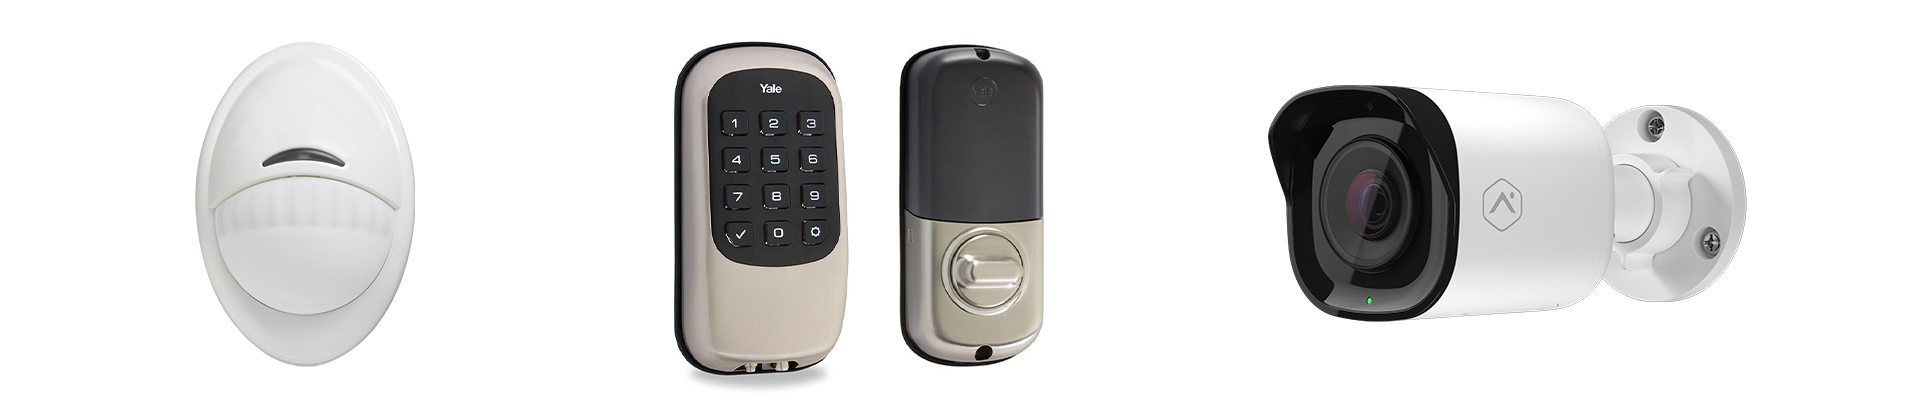 Motion detectors, smart locks and cameras that can be added onto your system